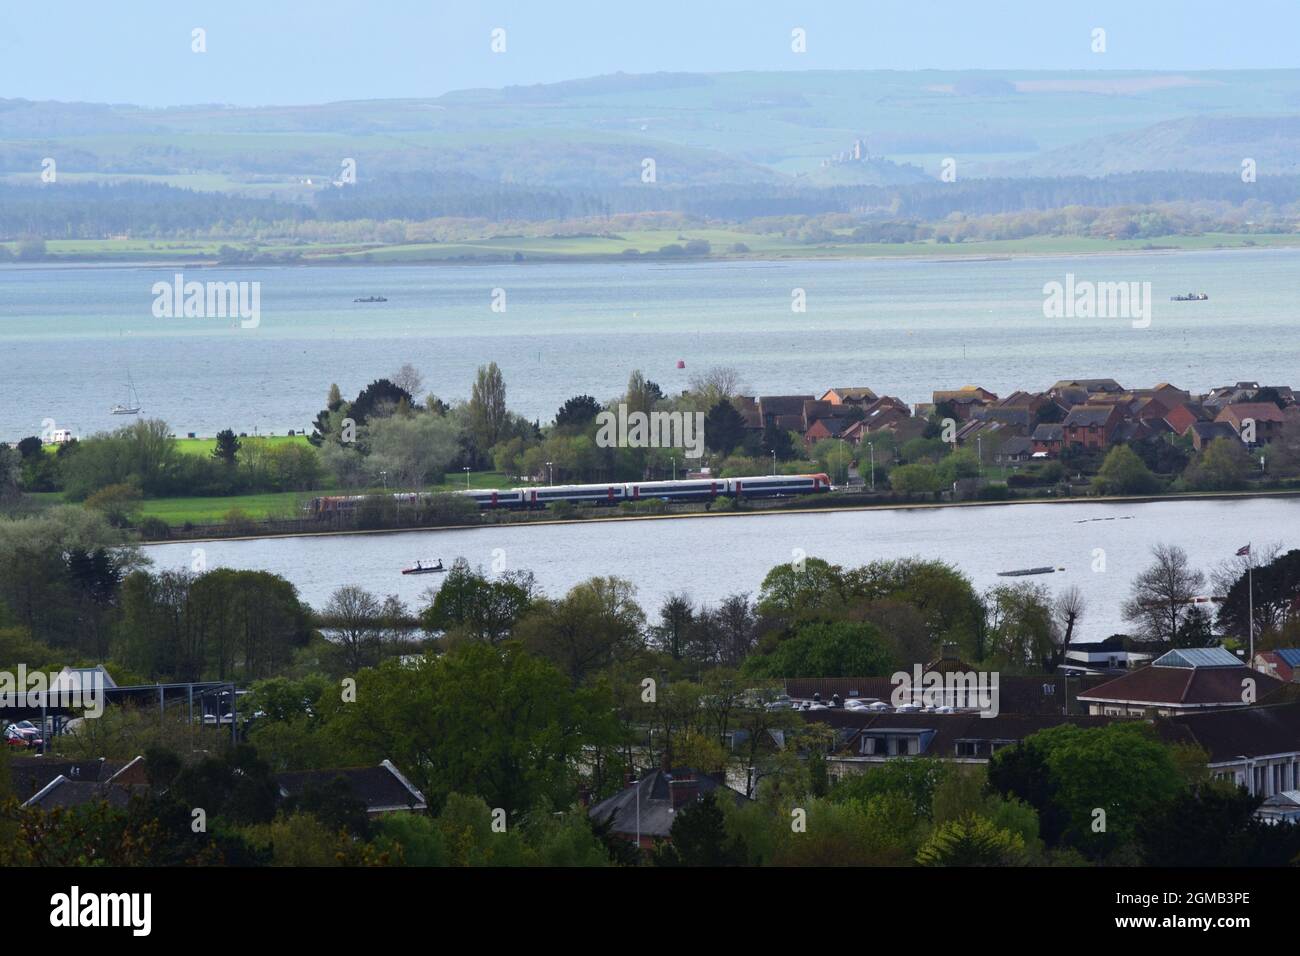 View over Poole Park lake and Poole Harbour, with the Purbeck hills and Corfe Castle in the background. Stock Photo